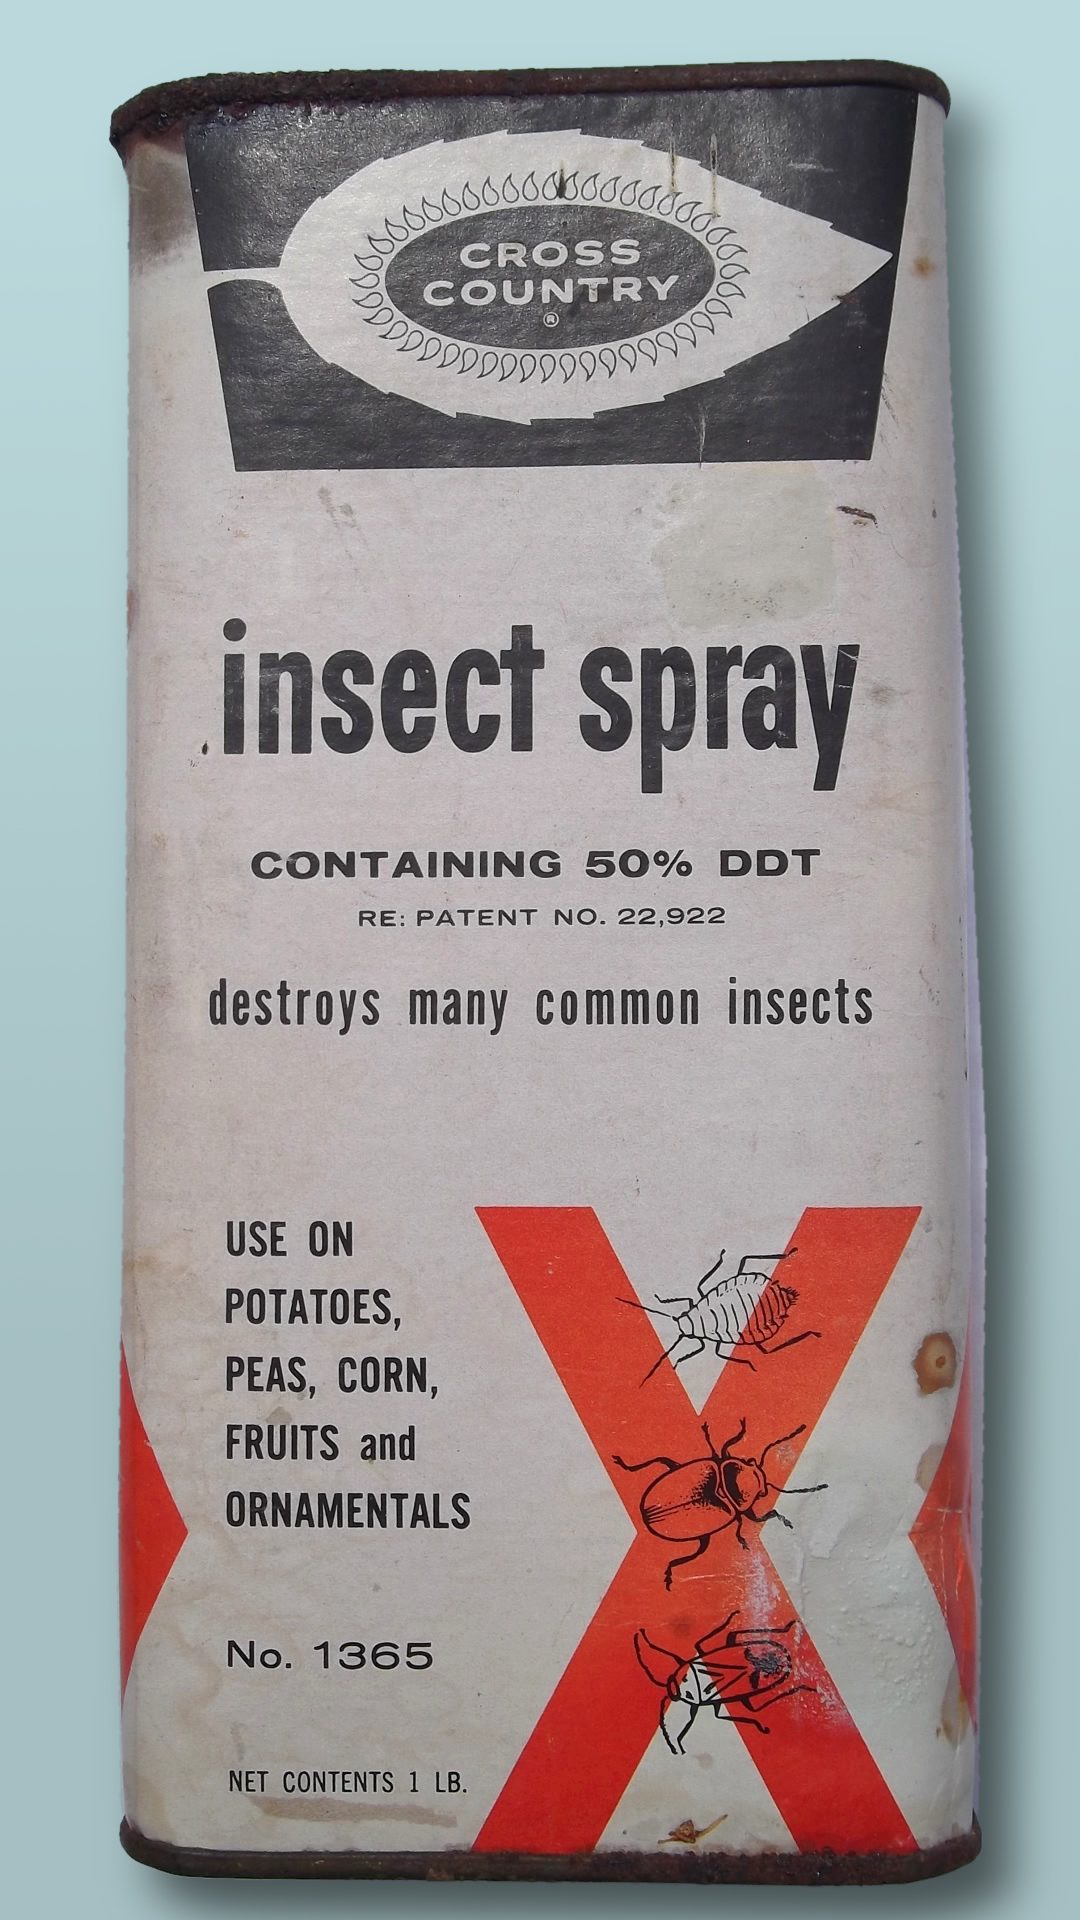 DDT powder in use in the 1960s